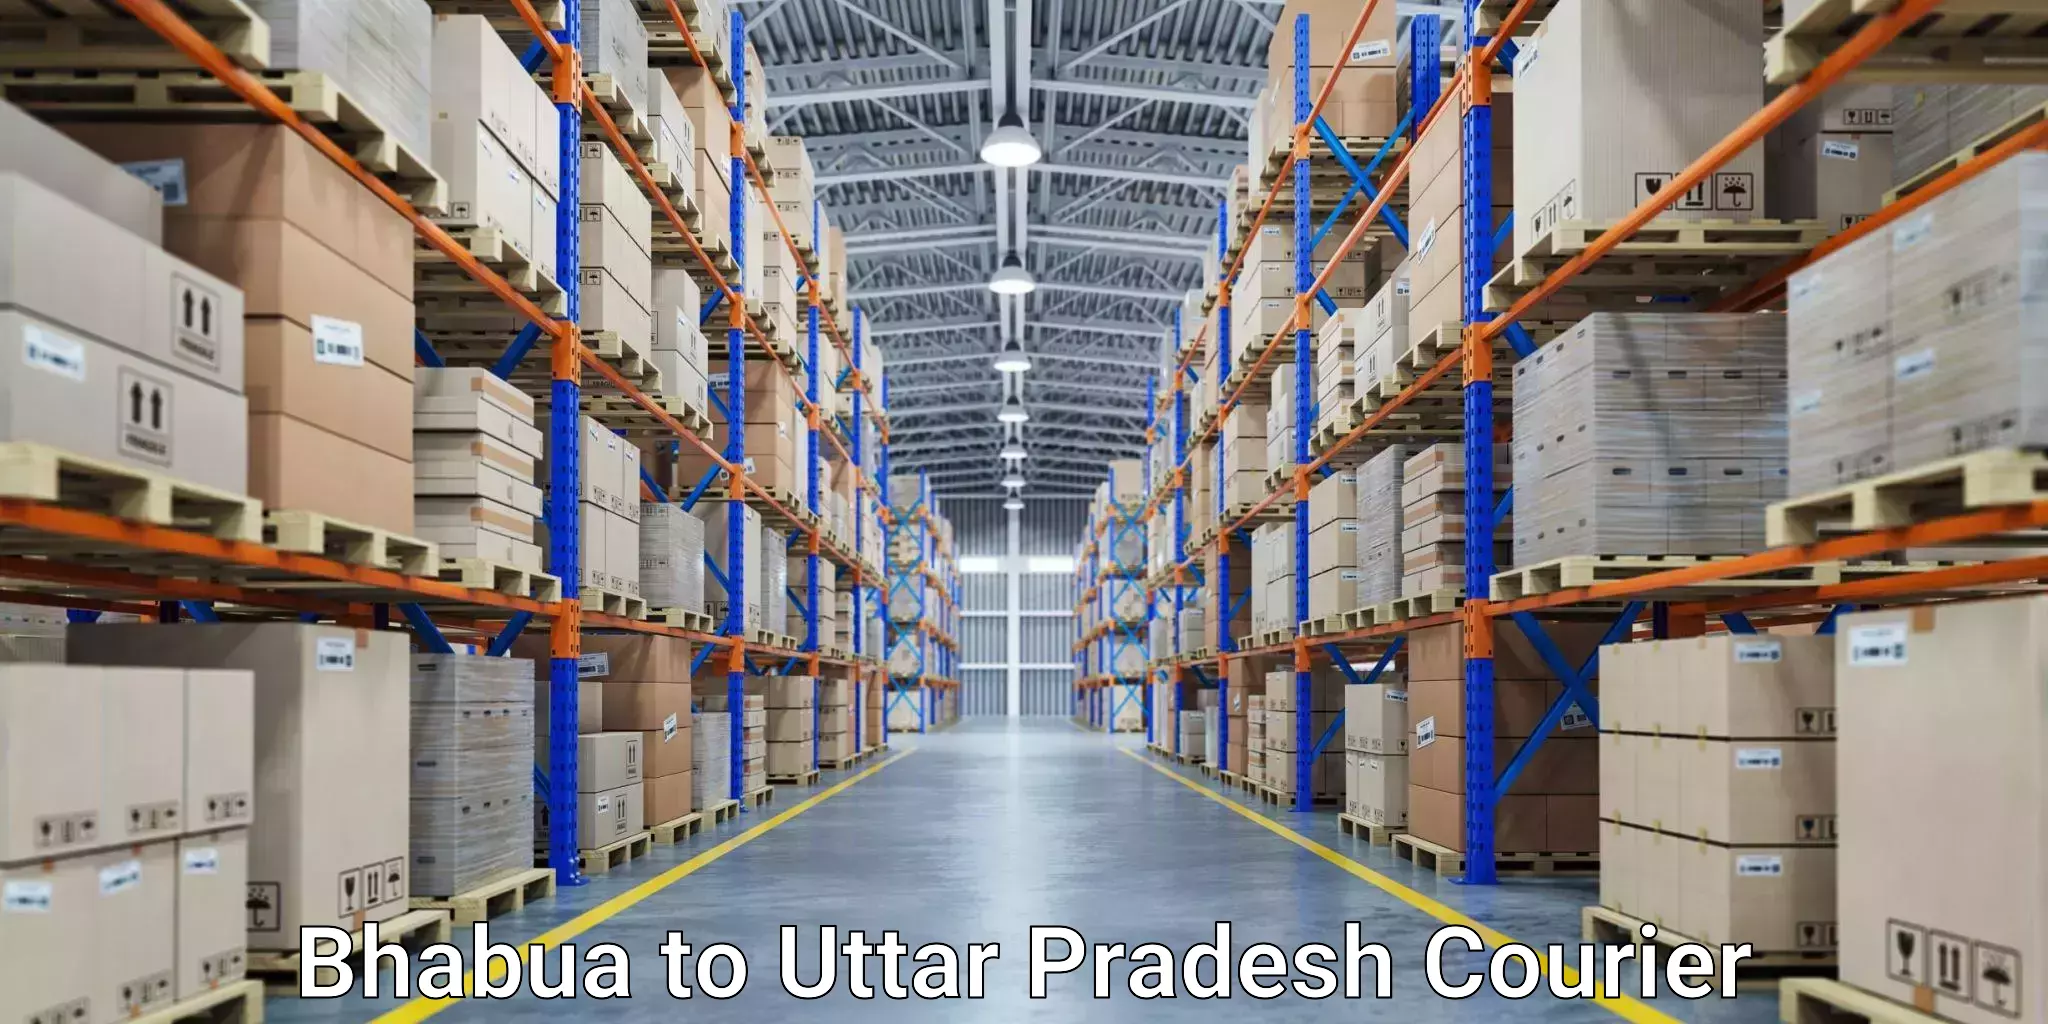 Professional courier handling Bhabua to Kanpur